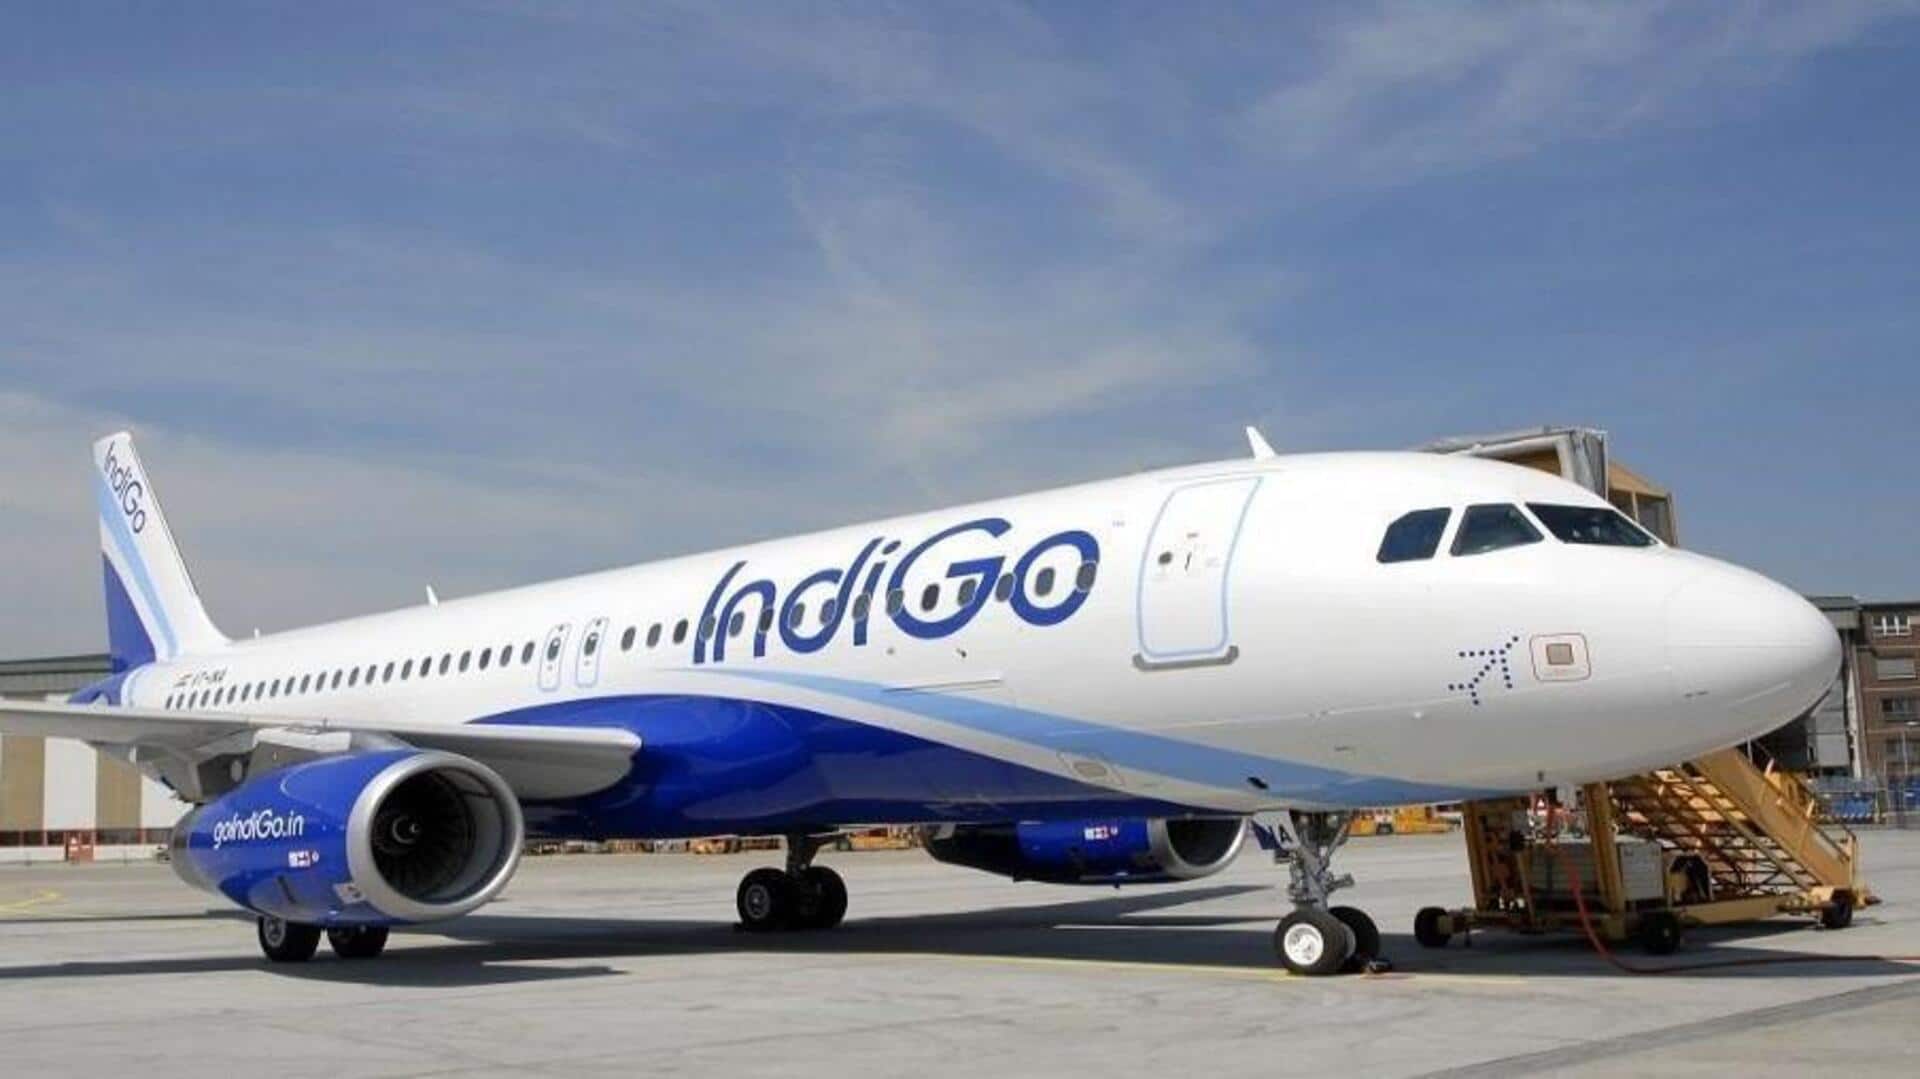 Gangwal family plans to sell IndiGo stake worth Rs. 3,730cr